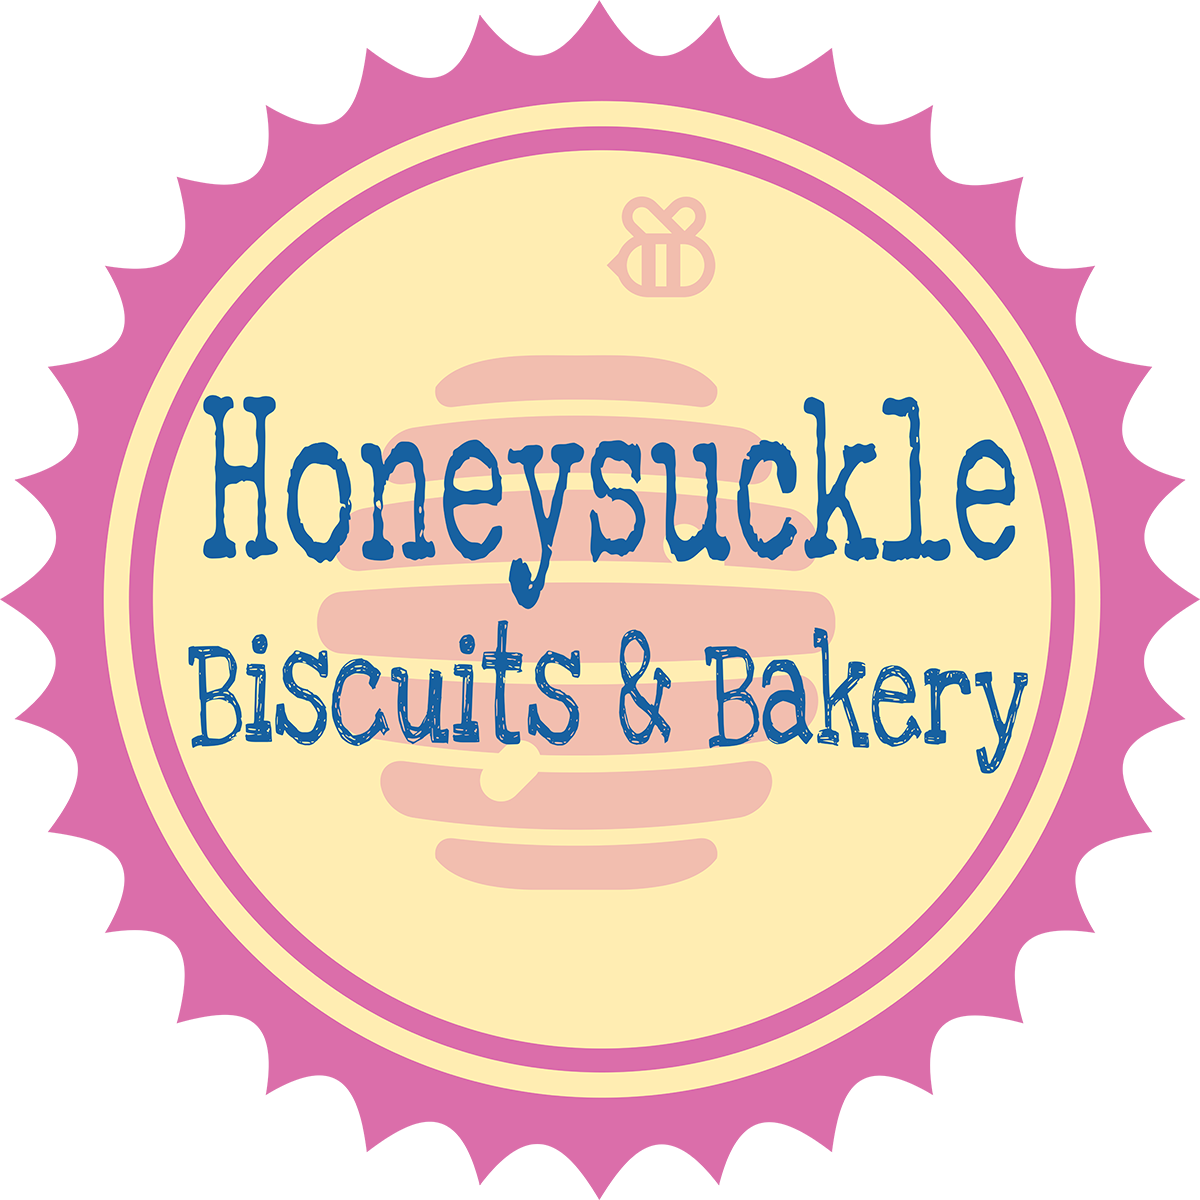 honey suckle biscuits and bakery logo